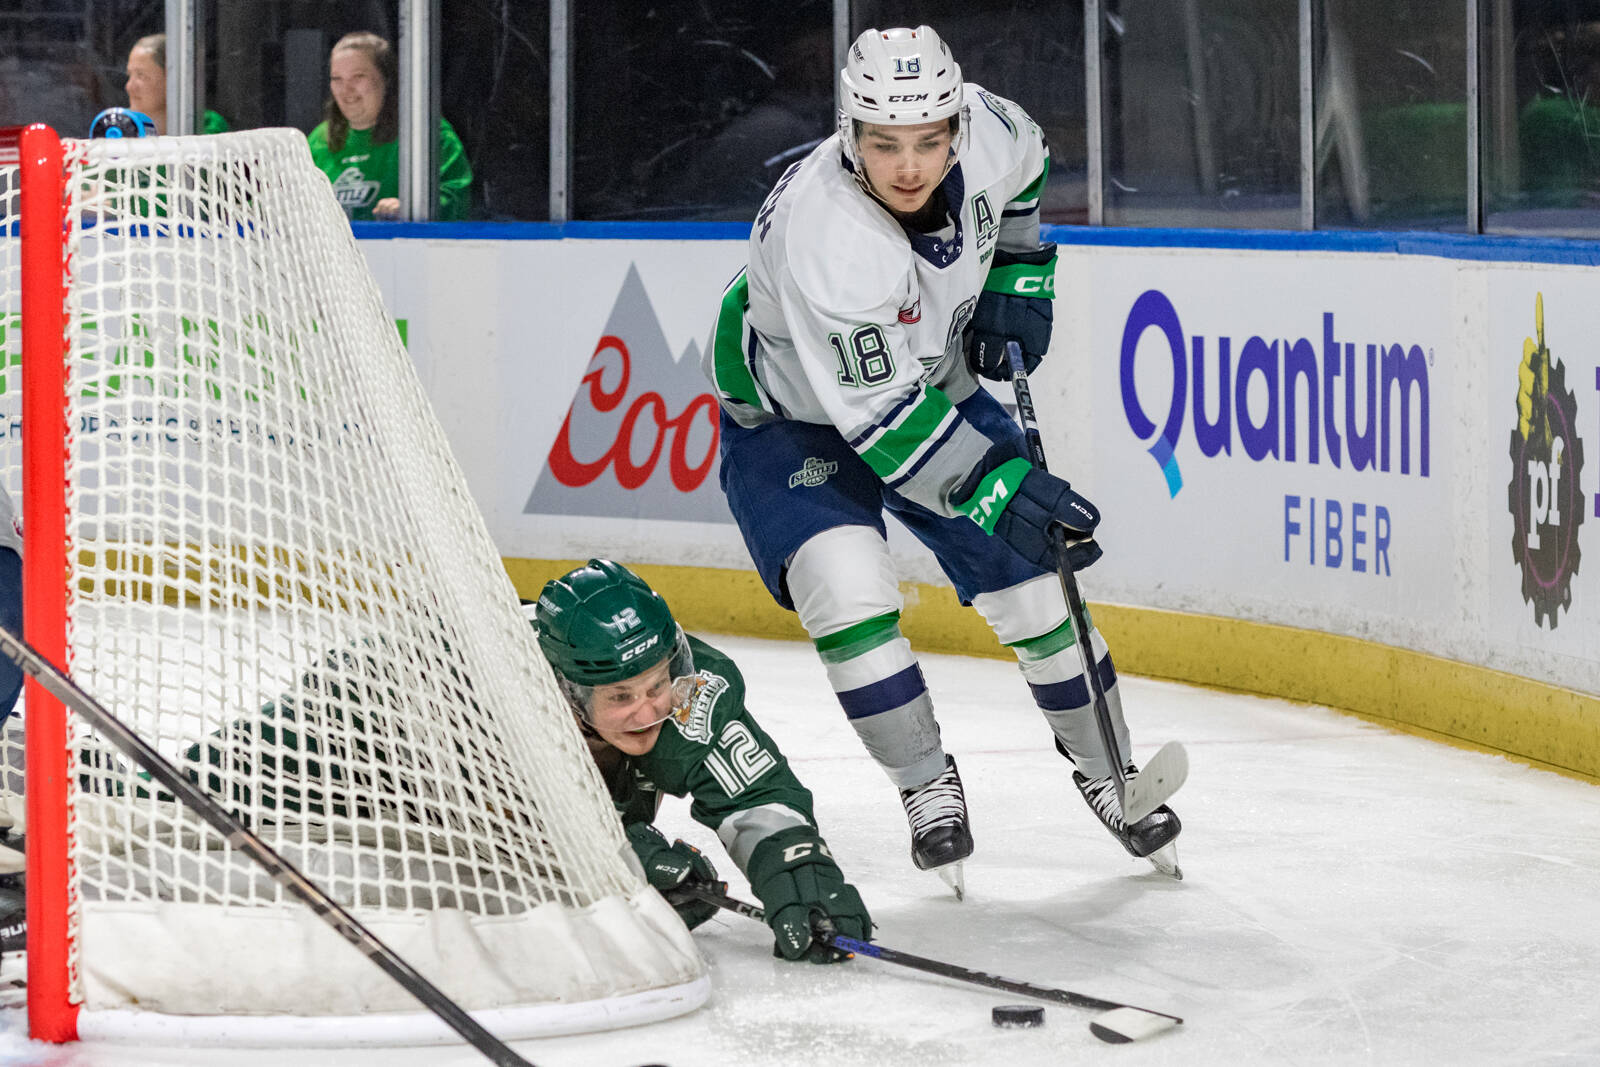 Seattle’s Sam Popowich, in preseason action against Everett, scored the winning goal in the Thunderbirds’ WHL season-opening 3-2 win Saturday, Sept. 23 at the Wenatchee Wild. COURTESY FILE PHOTO, Brian Liesse, Seattle Thunderbirds